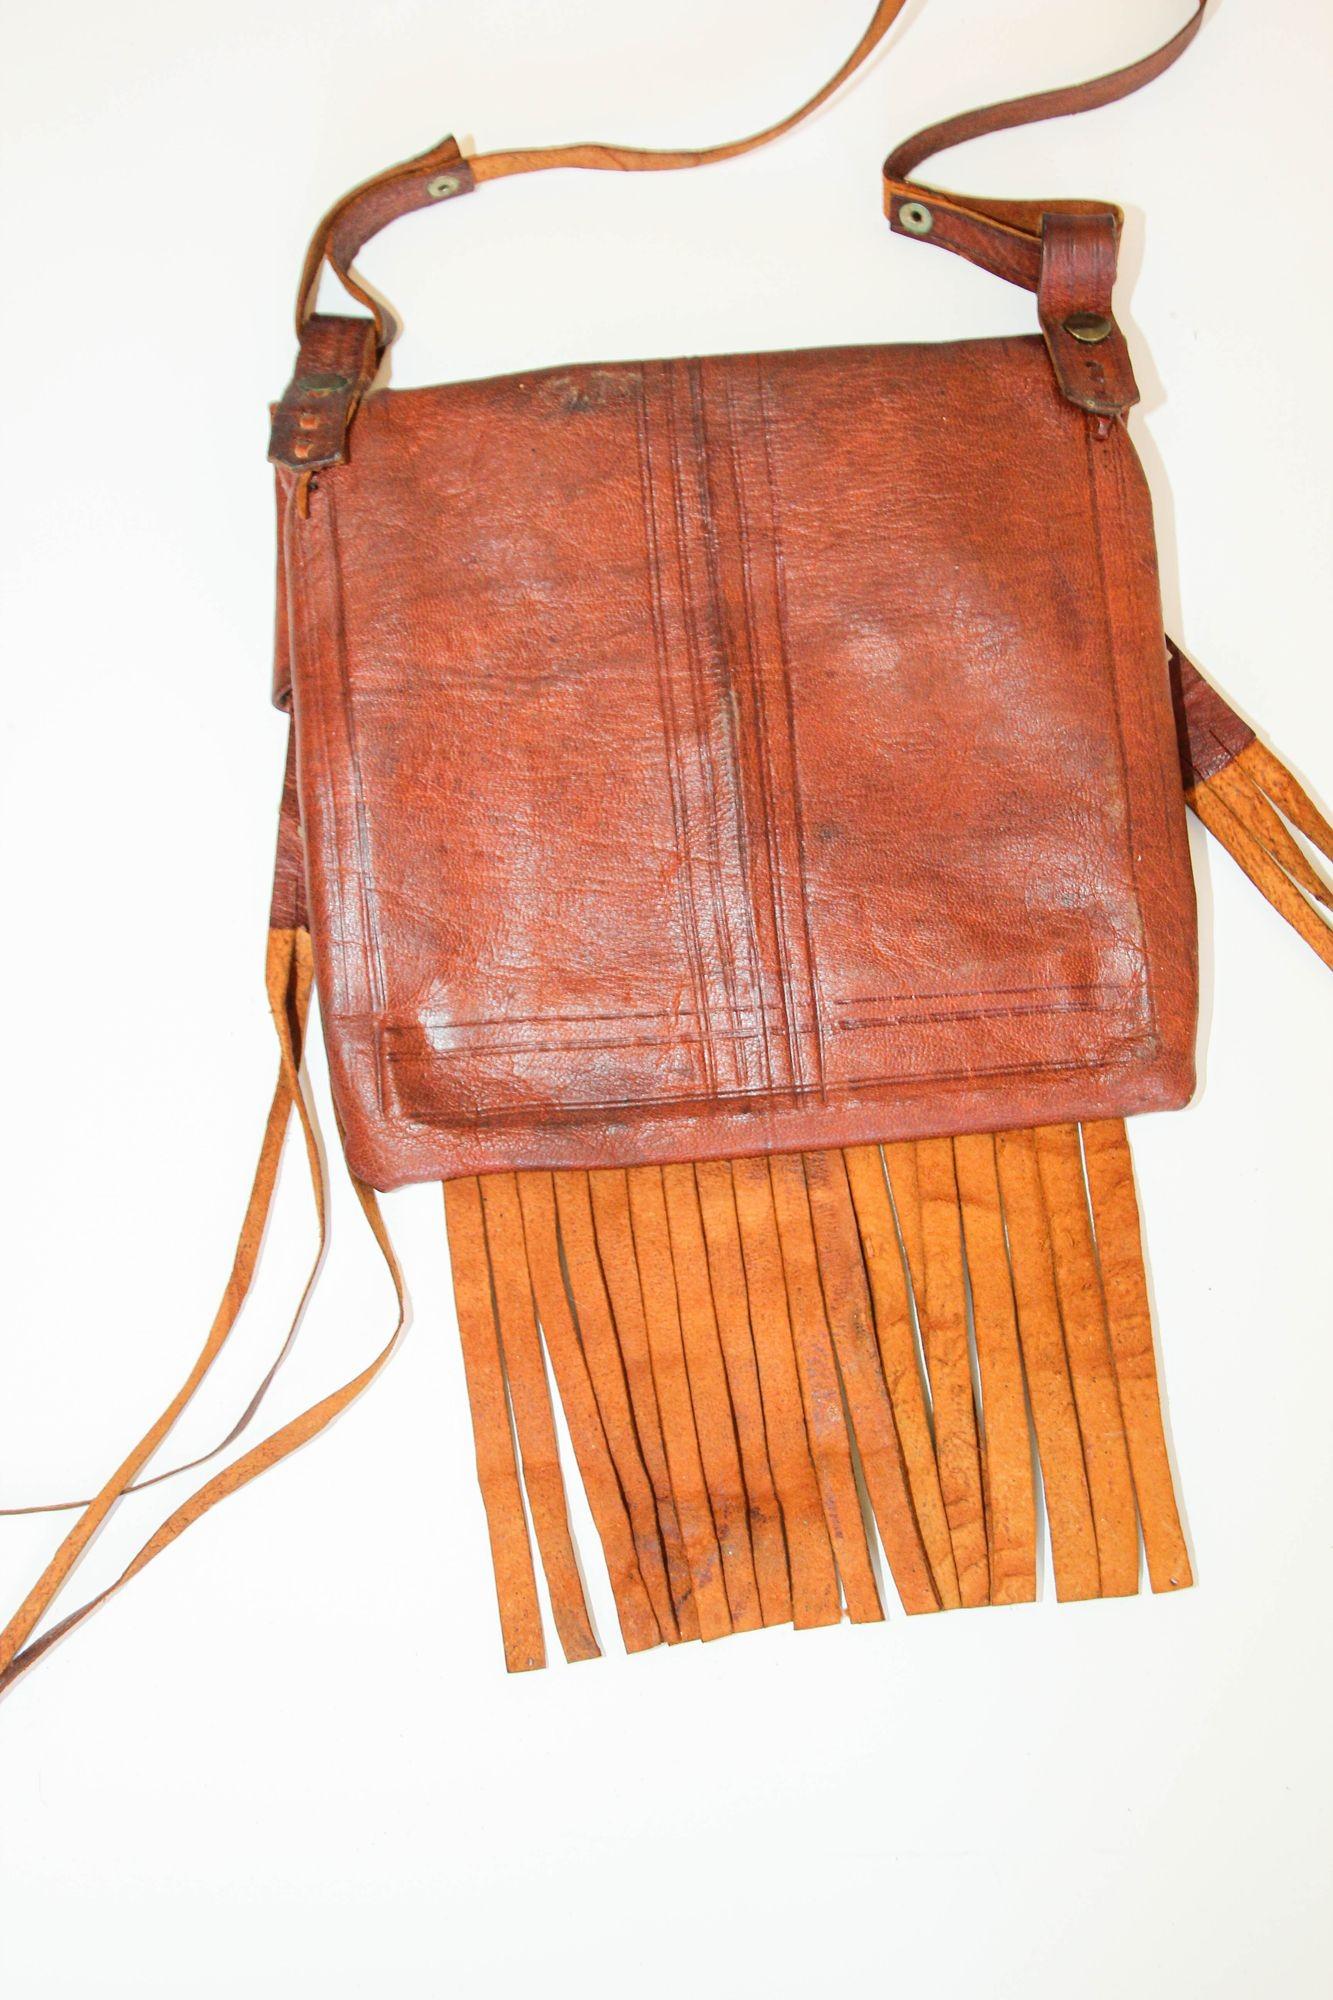 Moroccan Vintage Leather Handcrafted African Tuareg Bag with Fringes Wall Art In Good Condition For Sale In North Hollywood, CA